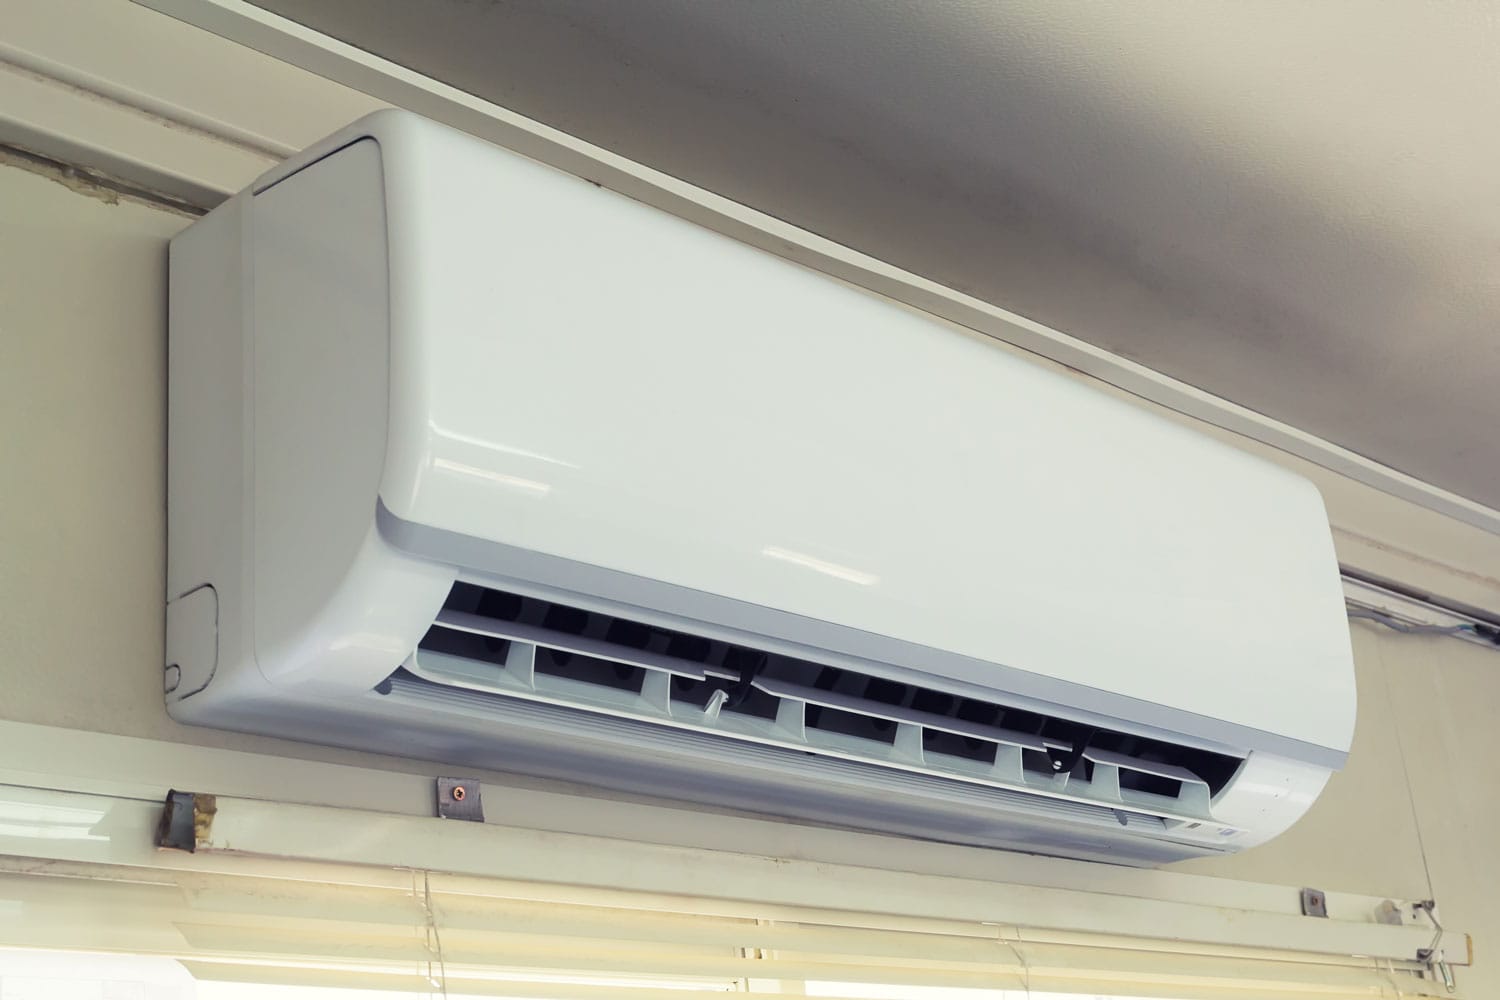 A mini split air conditioning unit mounted on the wall